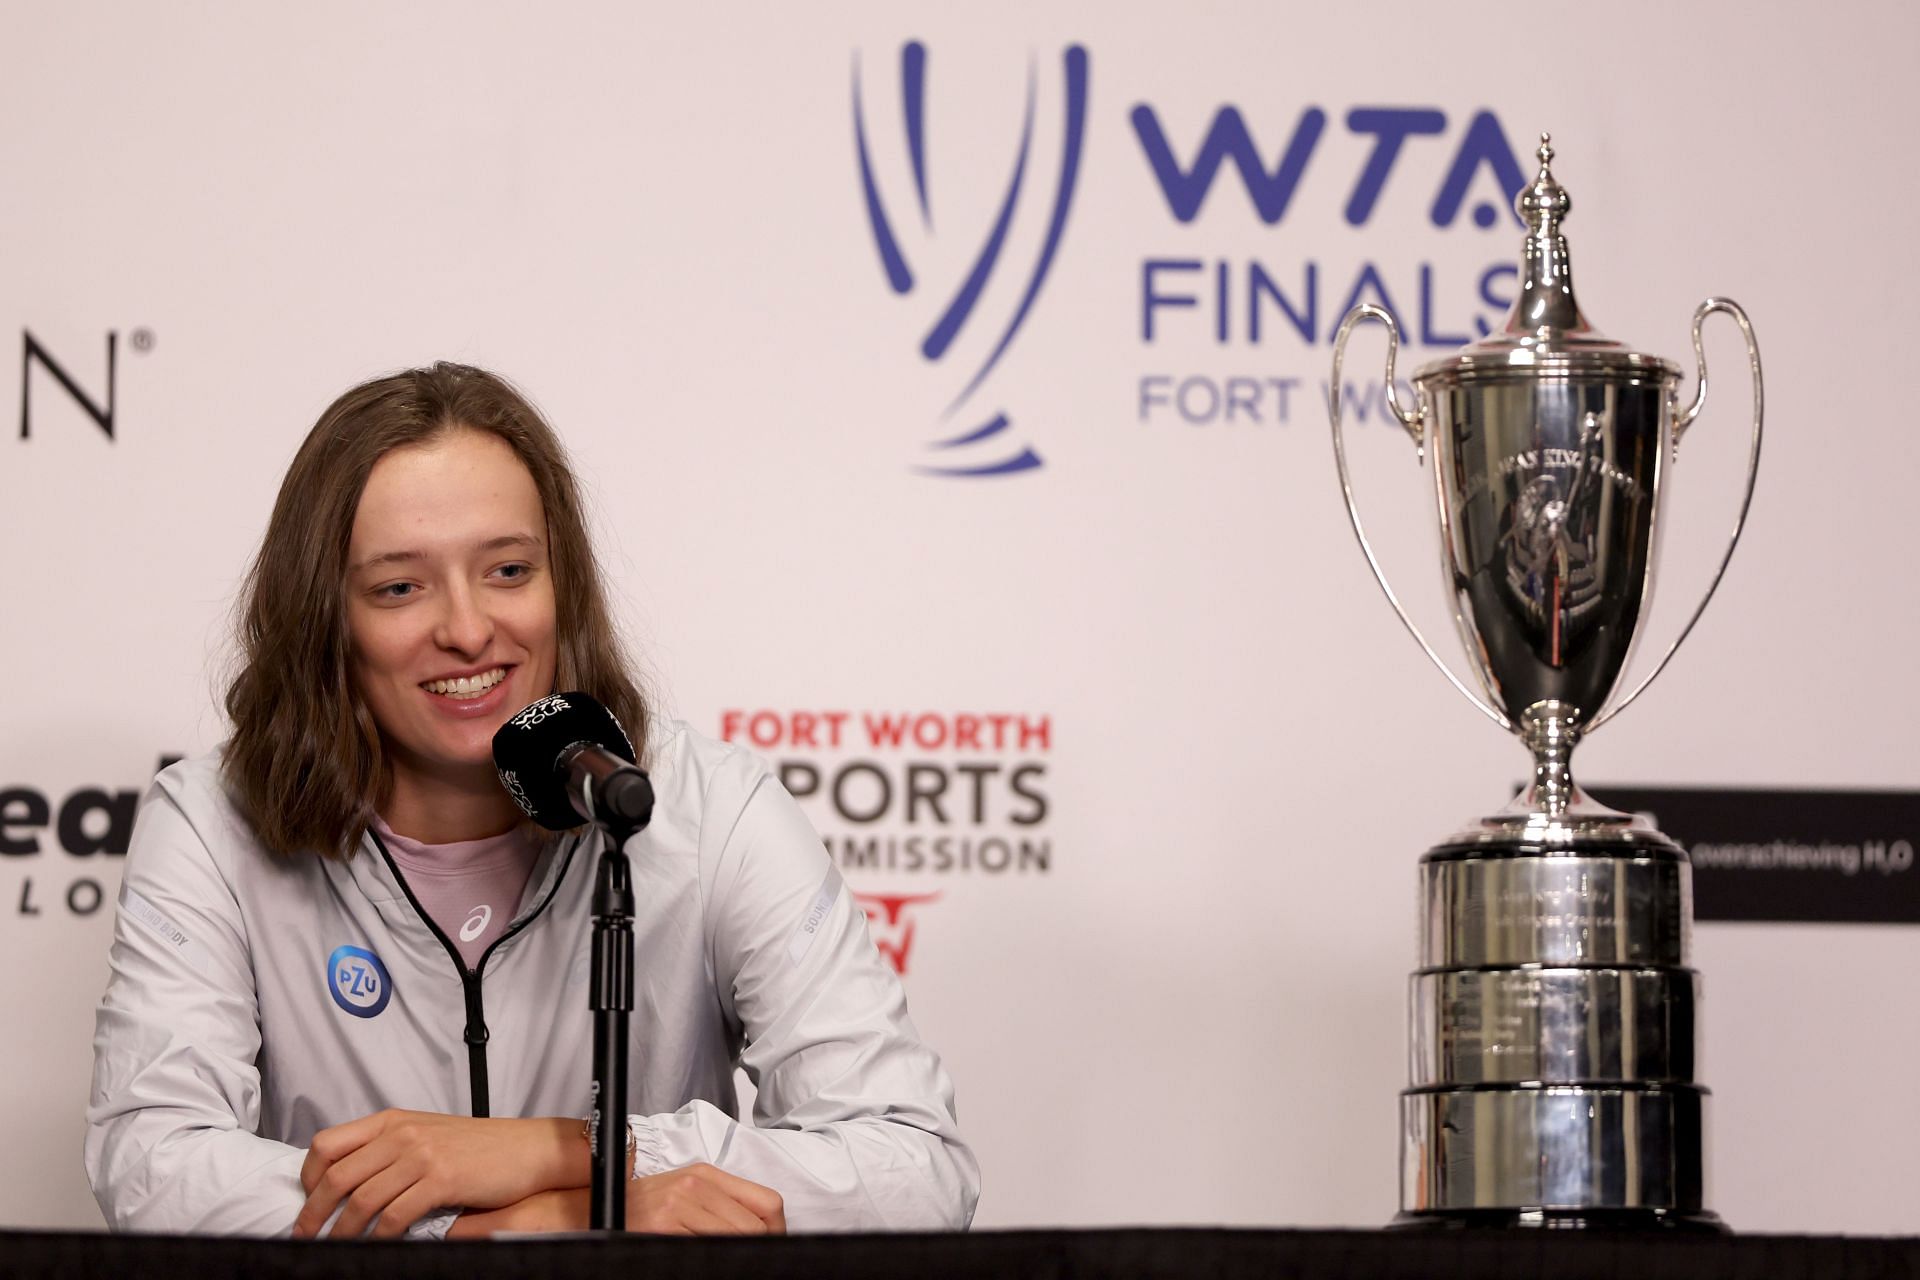 Iga Swiatek pictured during a press conference at the 2022 WTA Finals.